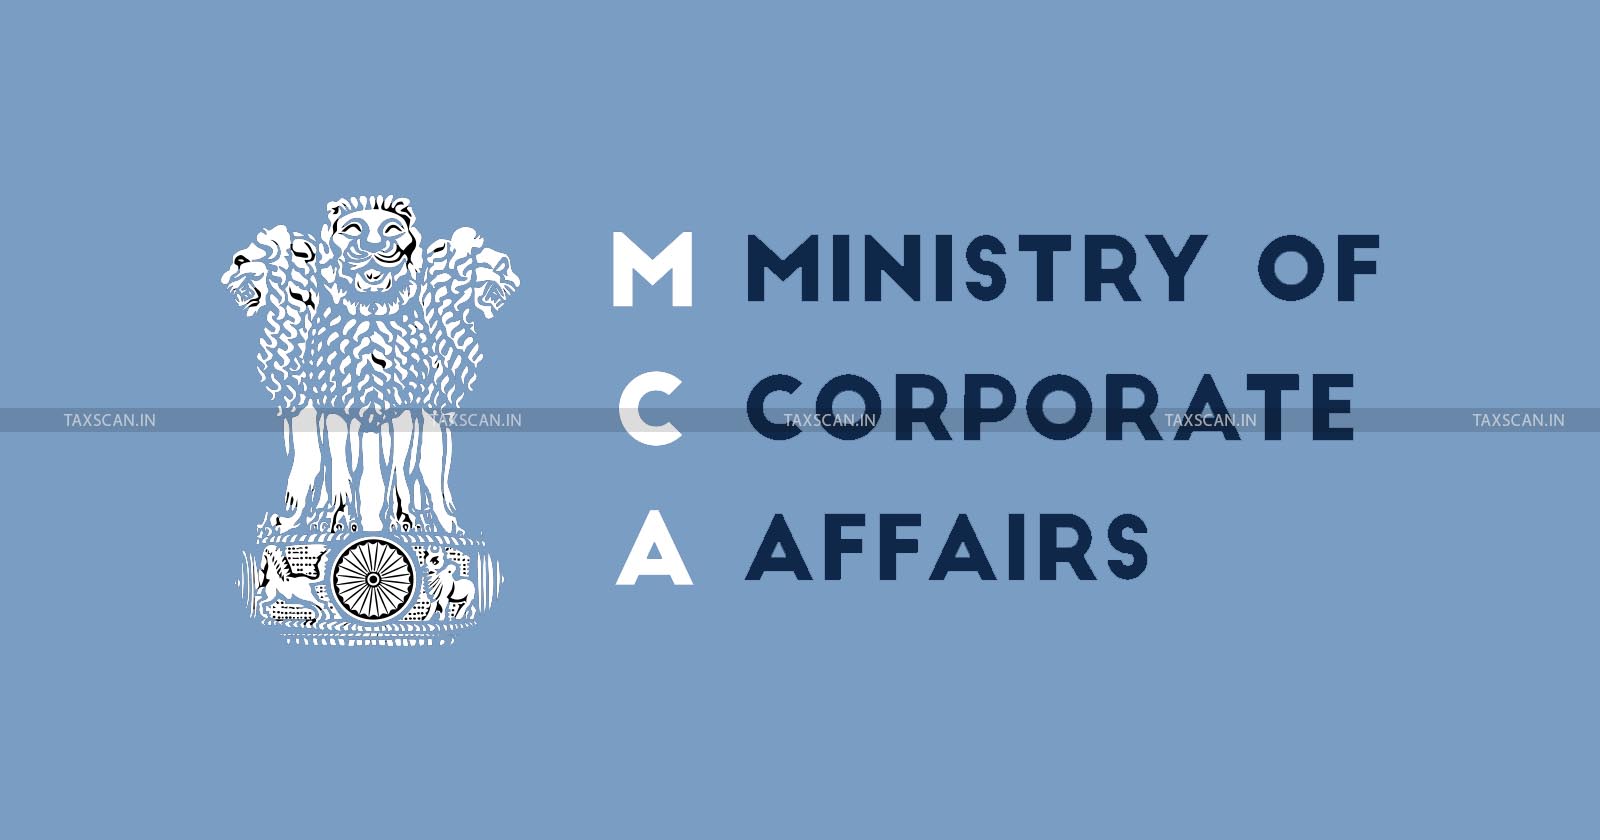 MCA - Ministry of Corporate Affairs - CCI - MCA updates - Competition Act exemptions - Business friendly regulations - TAXSCAN